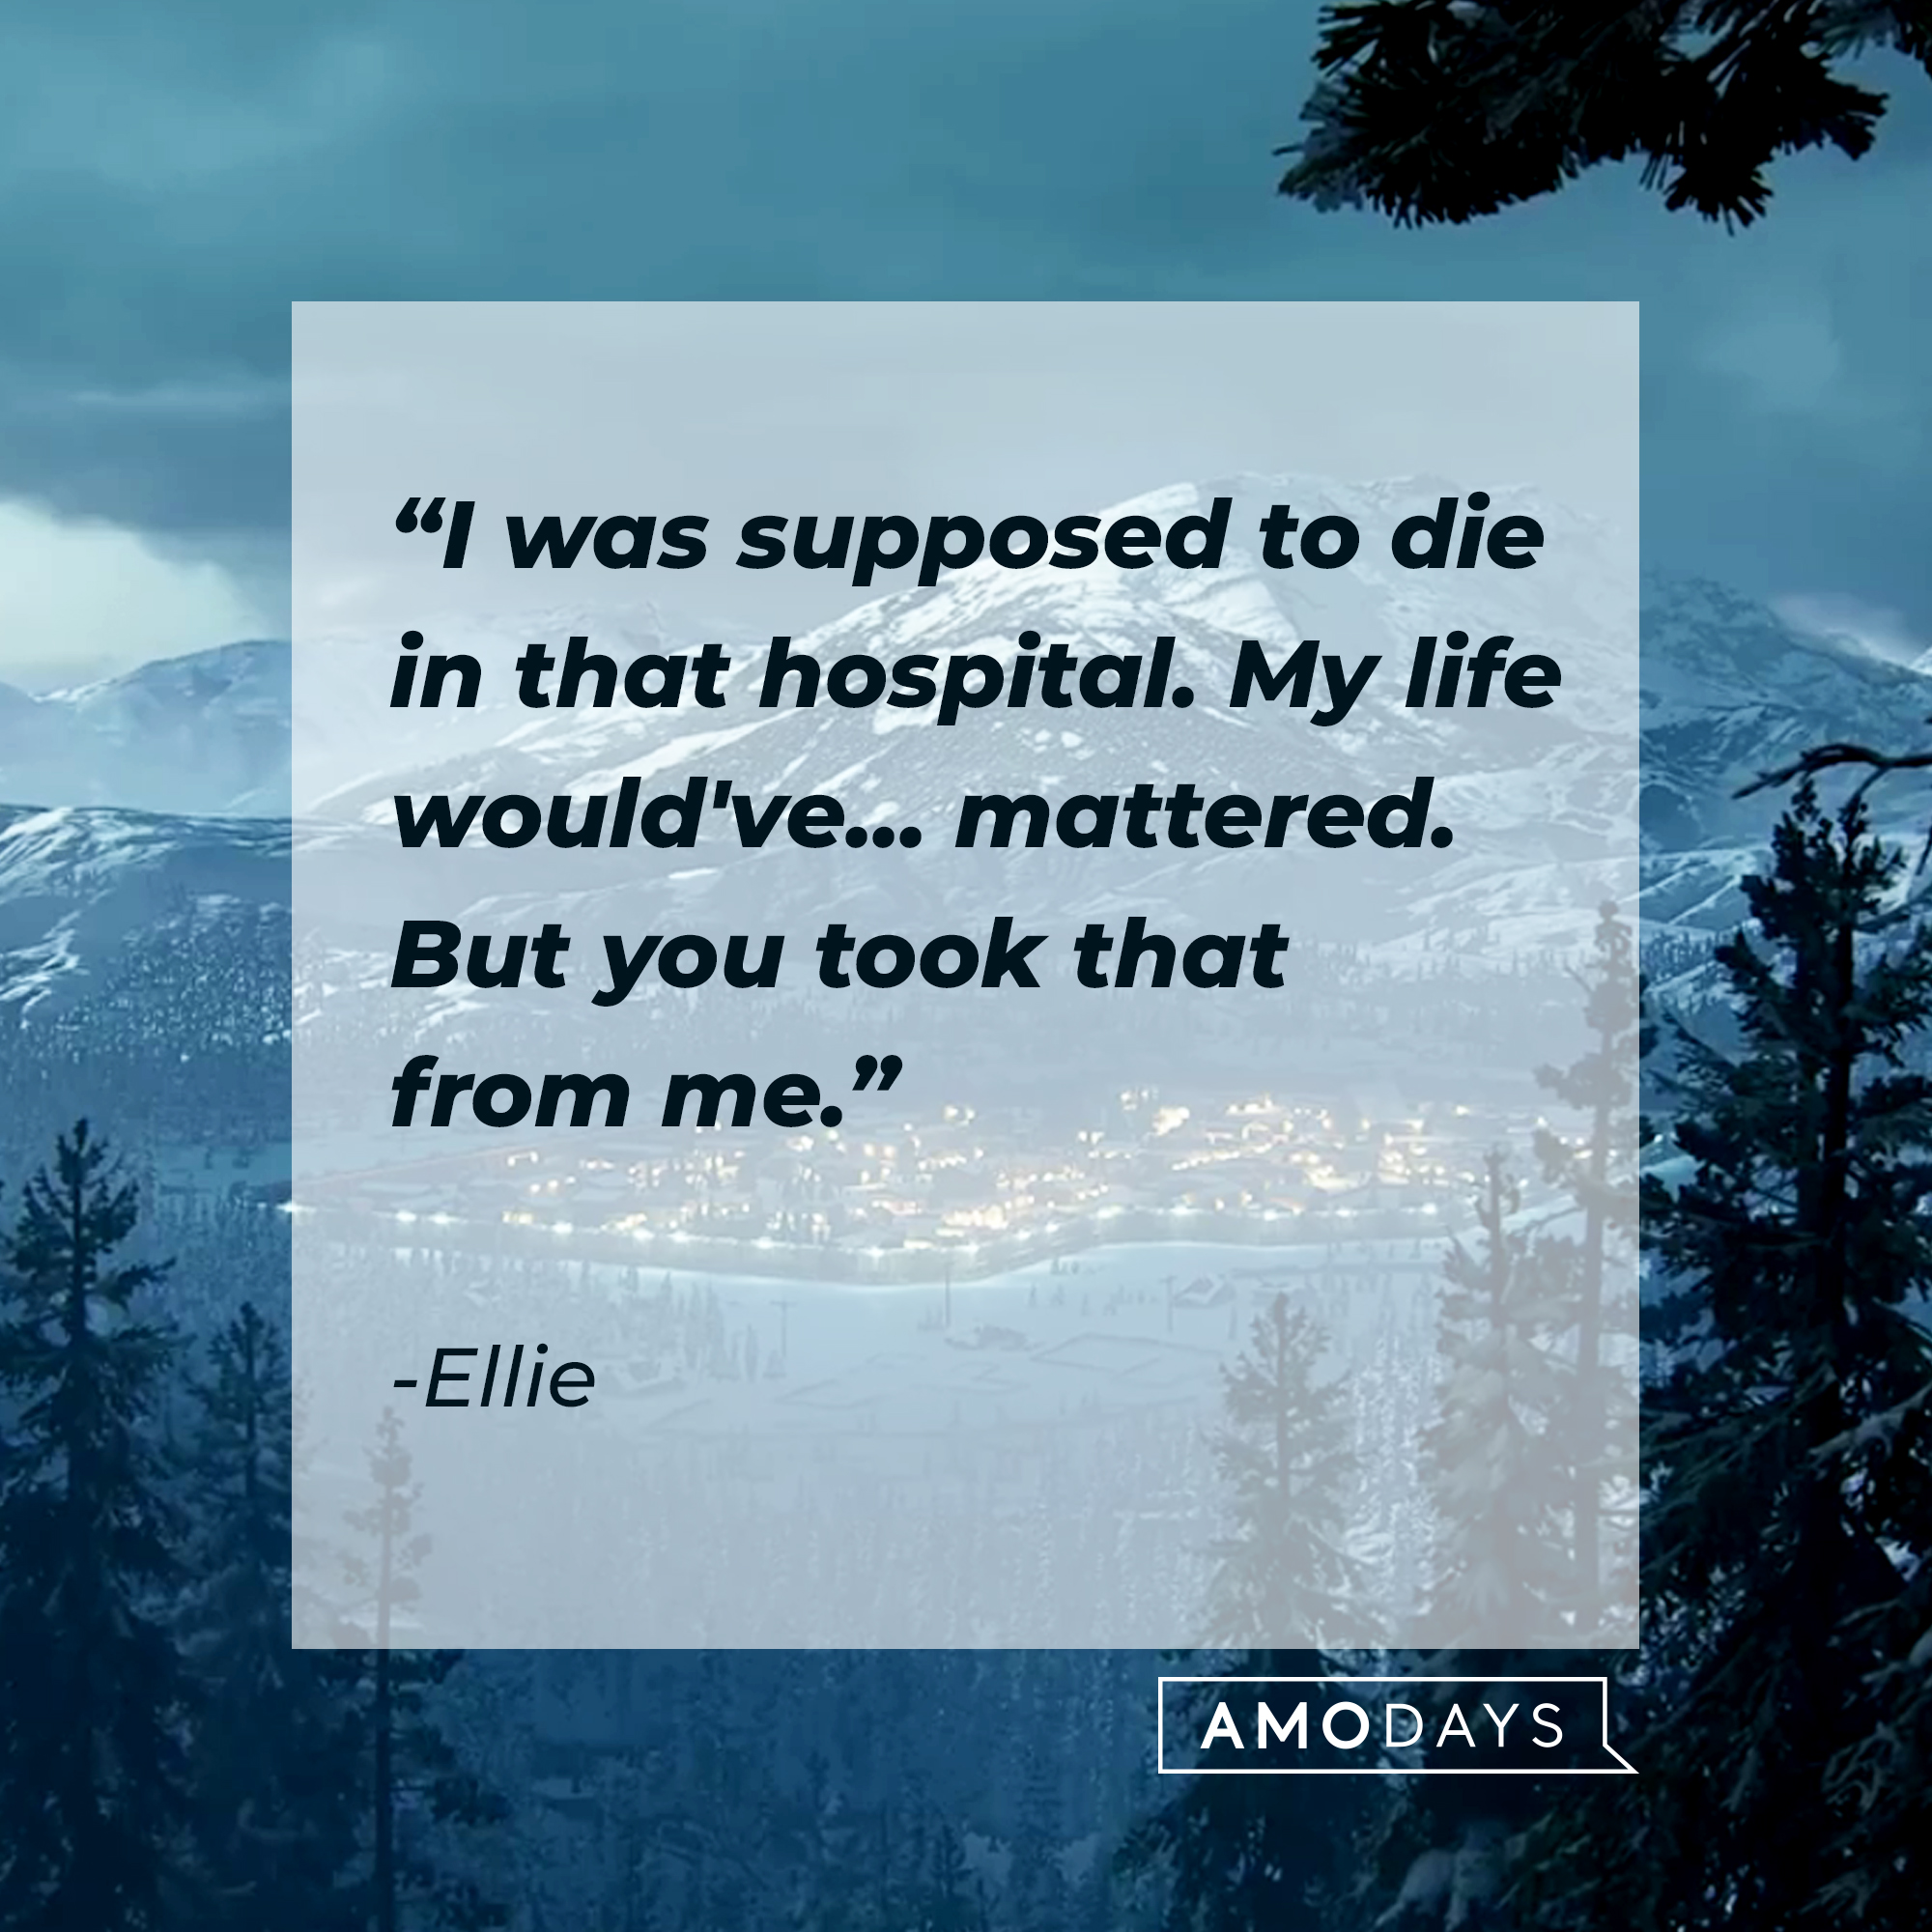 An image from “The Last of Us 2” with Ellie’s quote: "I was supposed to die in that hospital. My life would've...mattered. But you took that from me." | Source: Facebook.com/TLOUPS